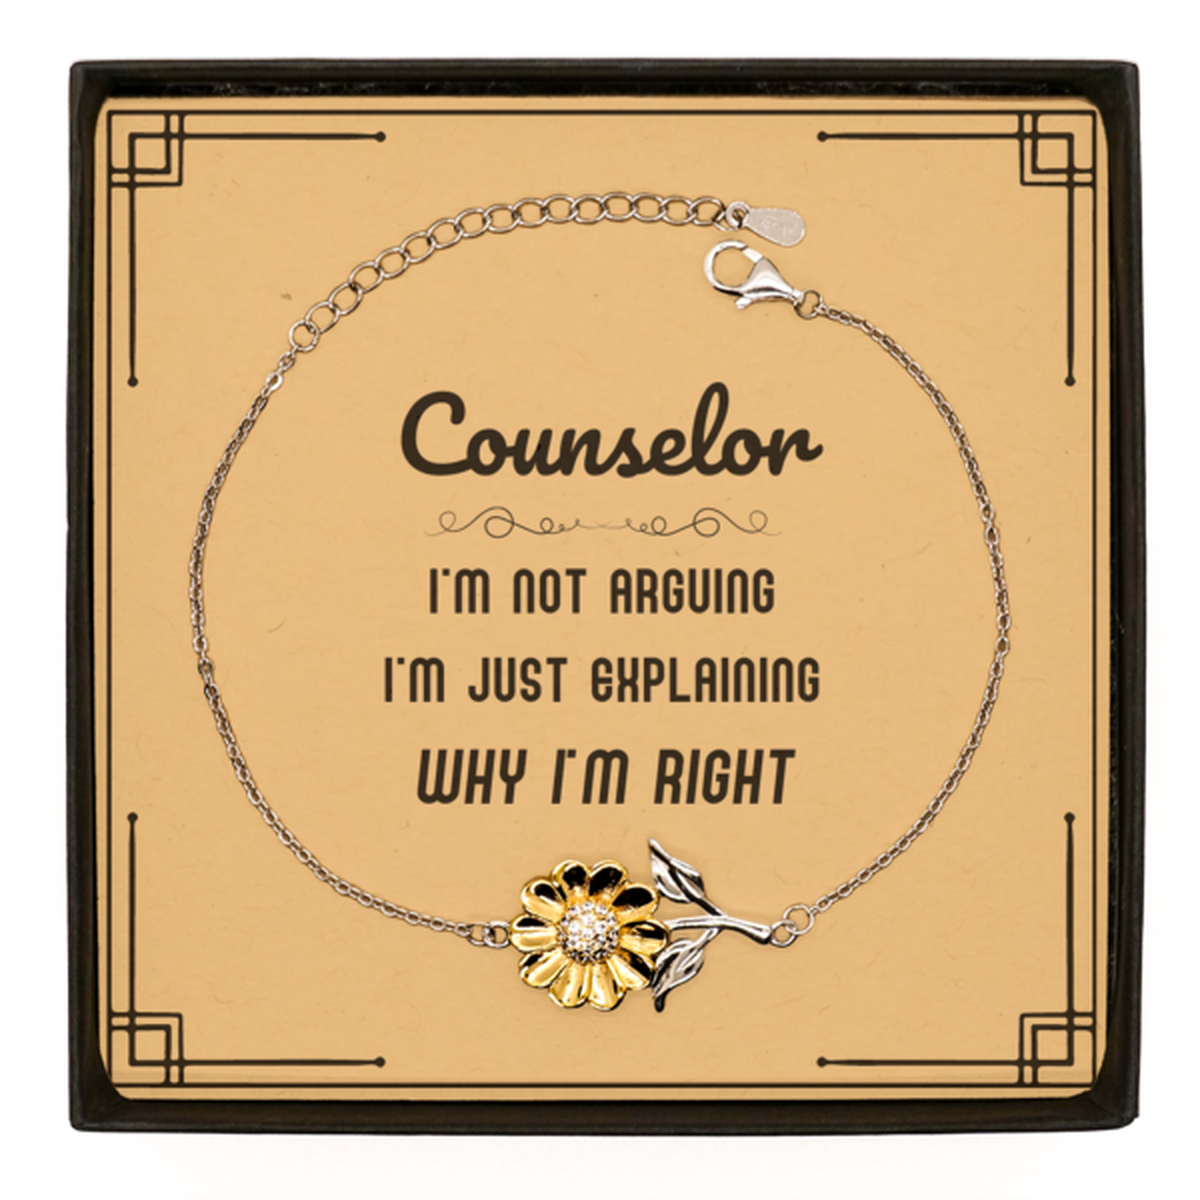 Counselor I'm not Arguing. I'm Just Explaining Why I'm RIGHT Sunflower Bracelet, Funny Saying Quote Counselor Gifts For Counselor Message Card Graduation Birthday Christmas Gifts for Men Women Coworker